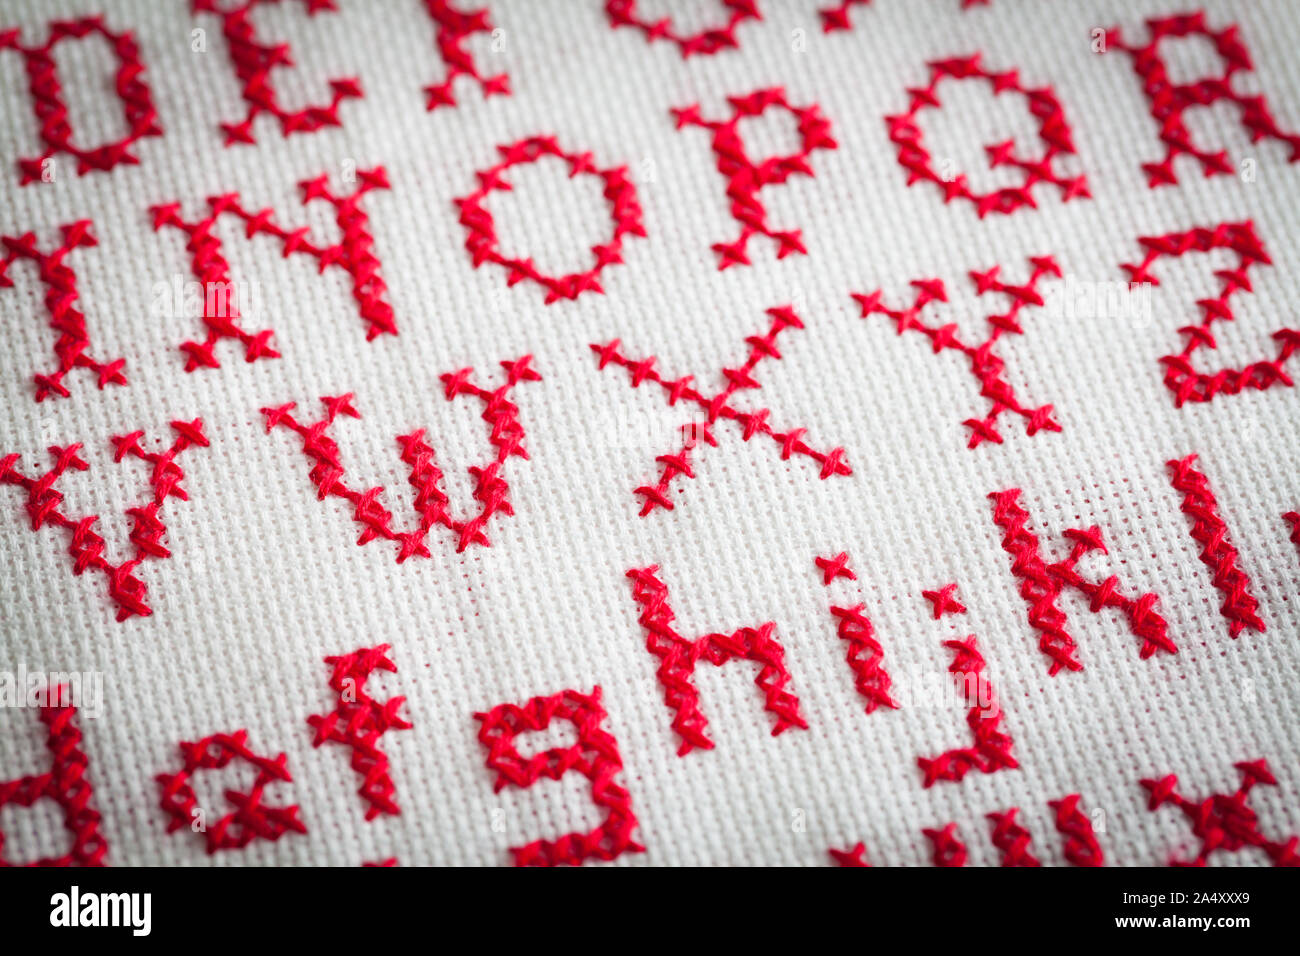 Red Alphabet Cross Stitch Close Up with Upper Case and Lower Case Letters. Stock Photo